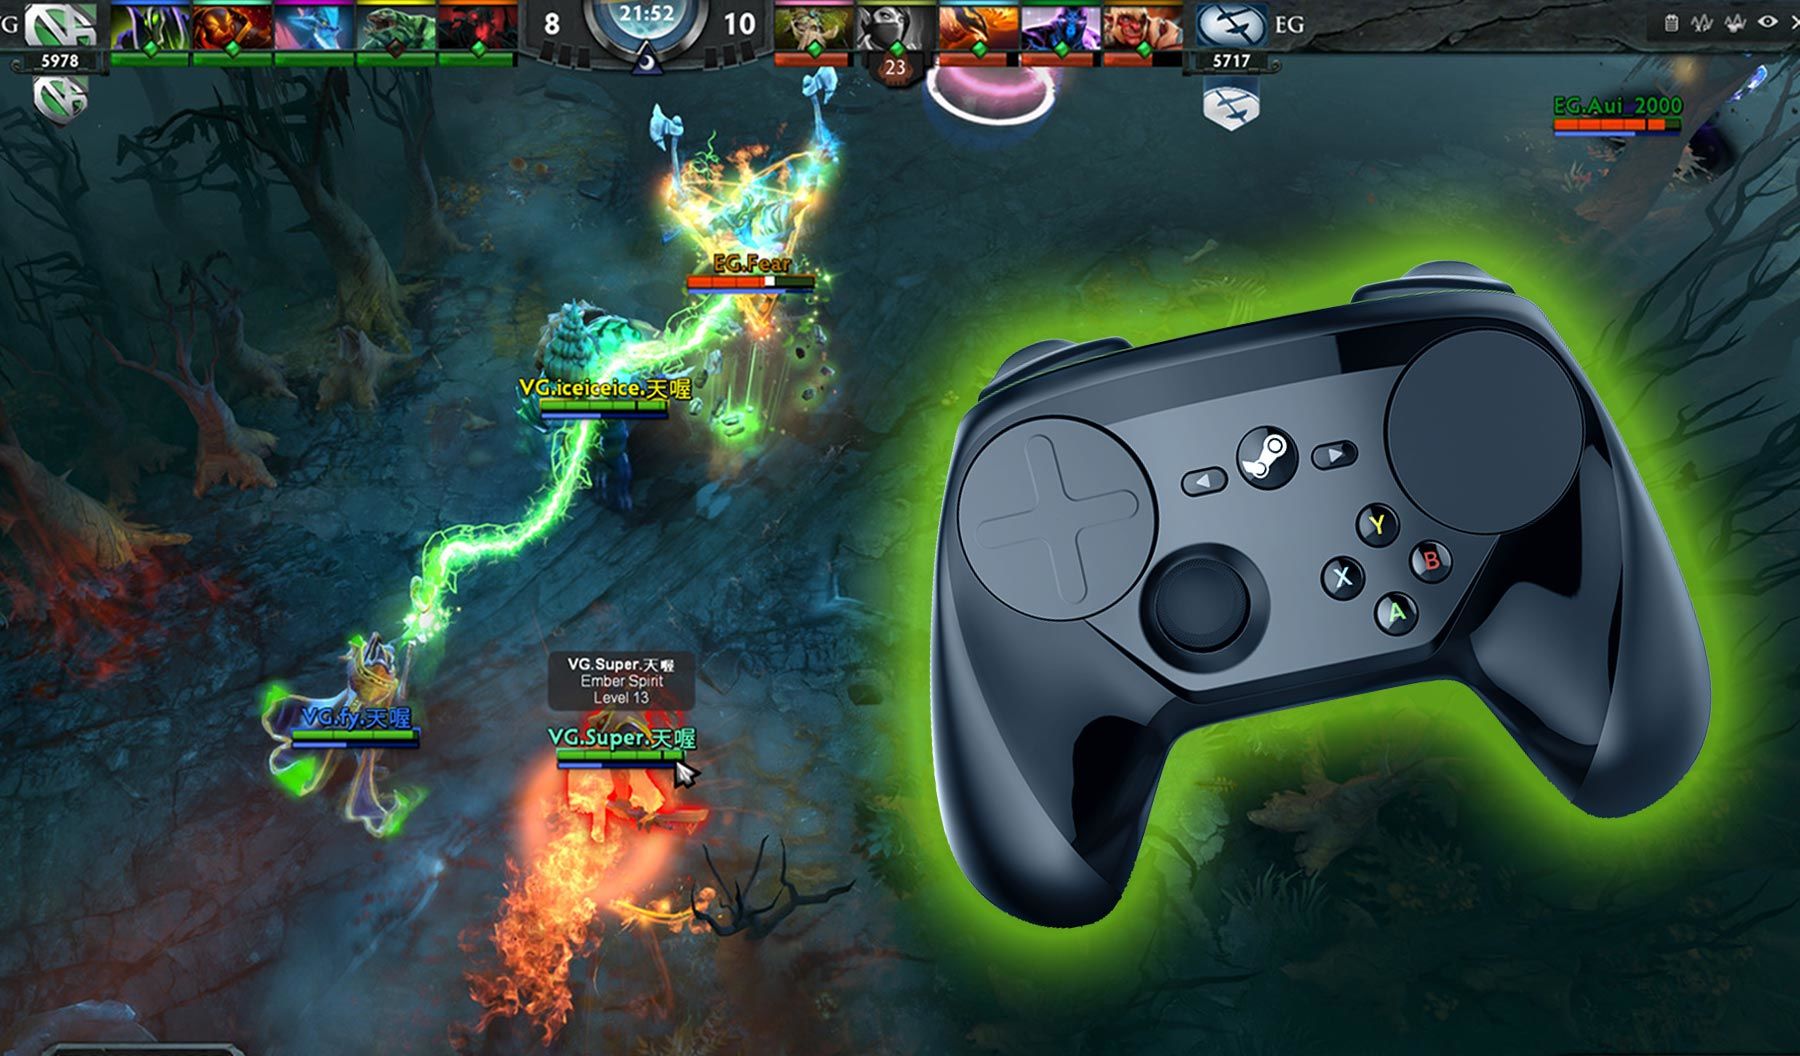 mistaken Paving Match Playing Dota 2 with a gamepad: main pros and cons